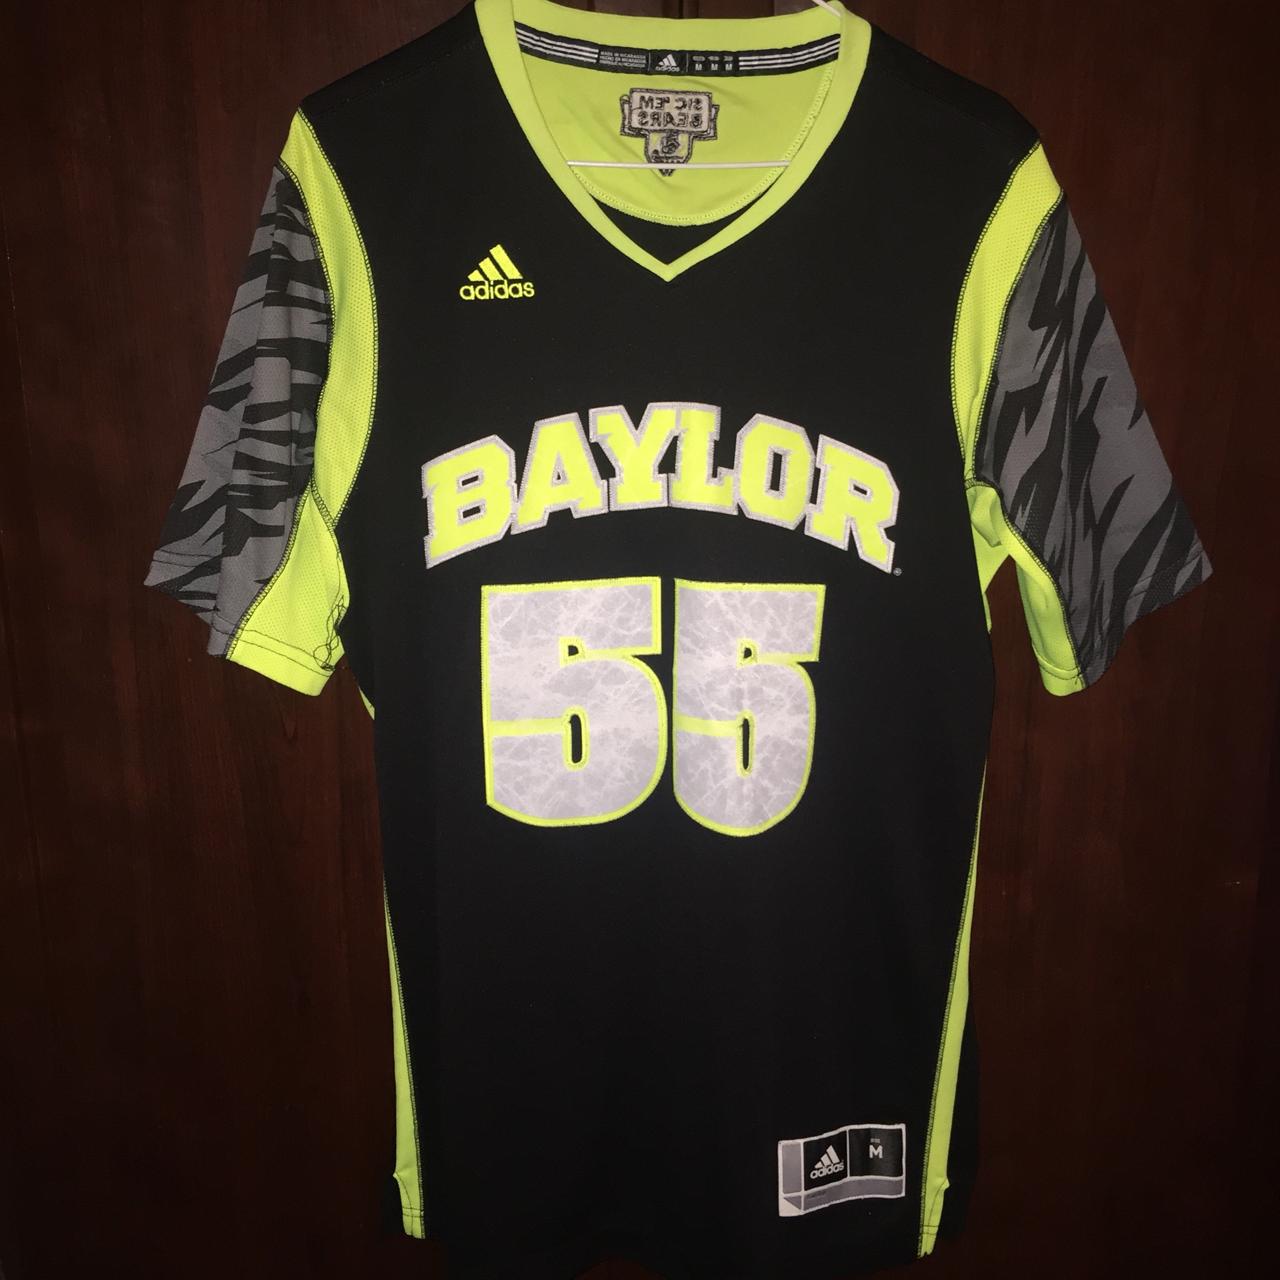 Baylor Bears in #neon yellow uniforms  Baylor basketball, Logo basketball,  Adidas basketball shoes